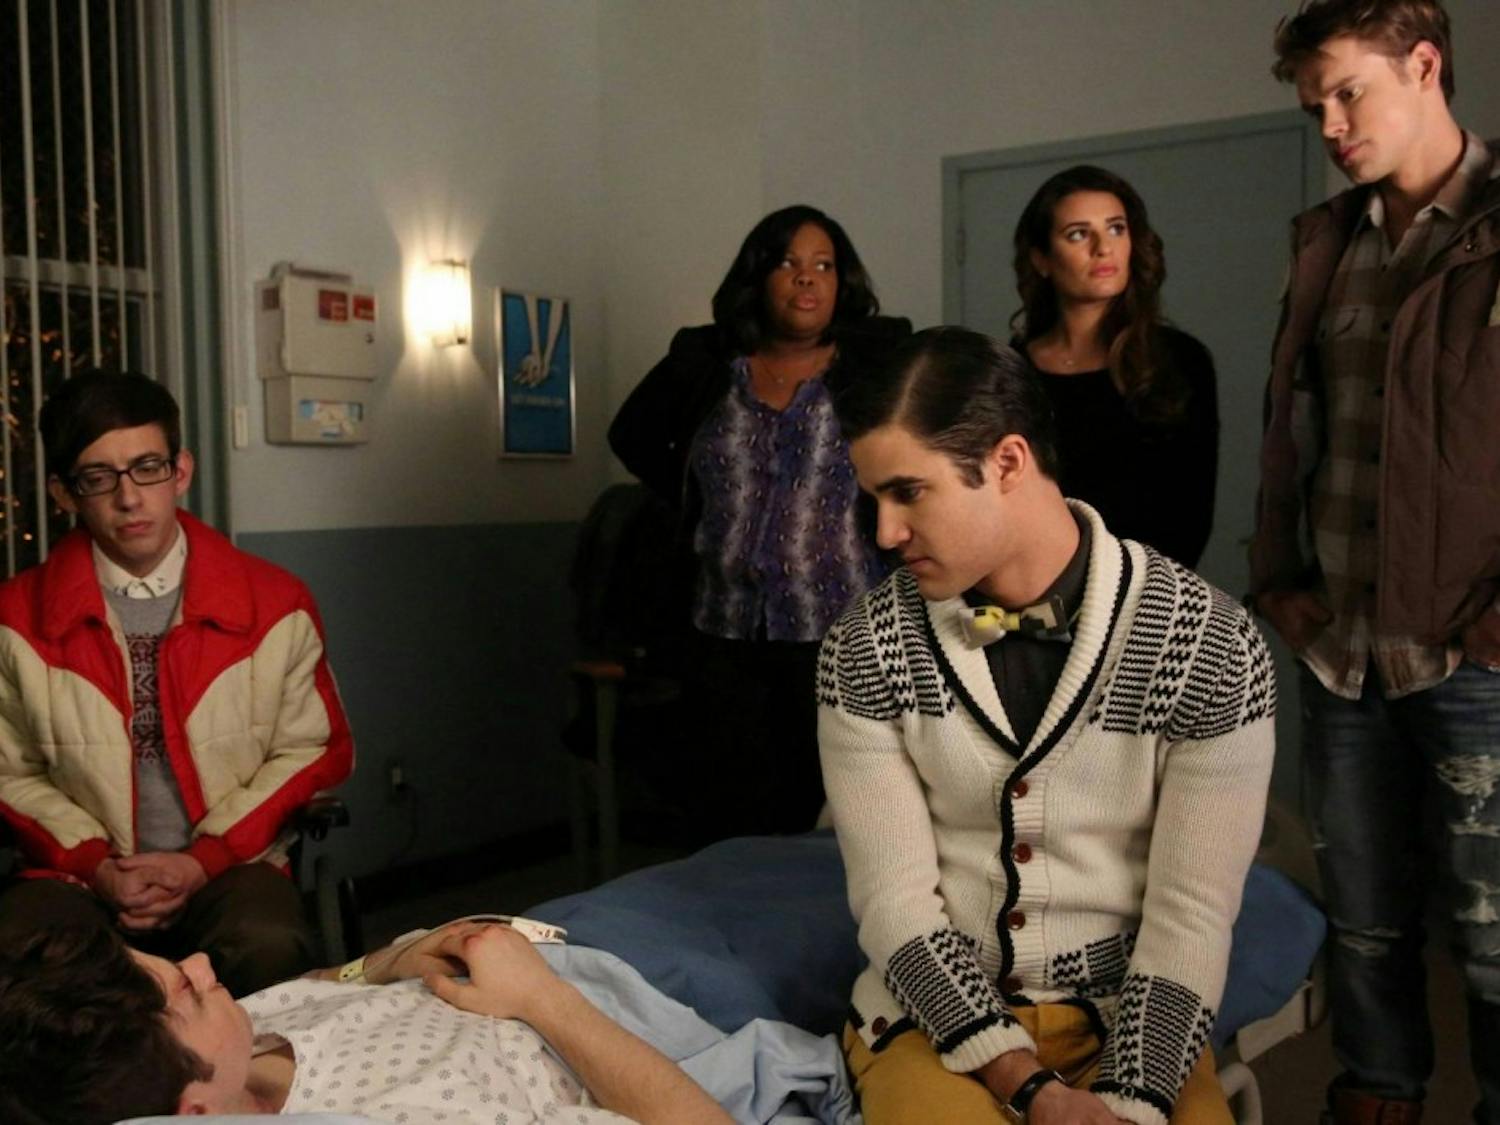 TV: ‘Glee’ soars with Sondheim but falters with the bigger issue at hand  